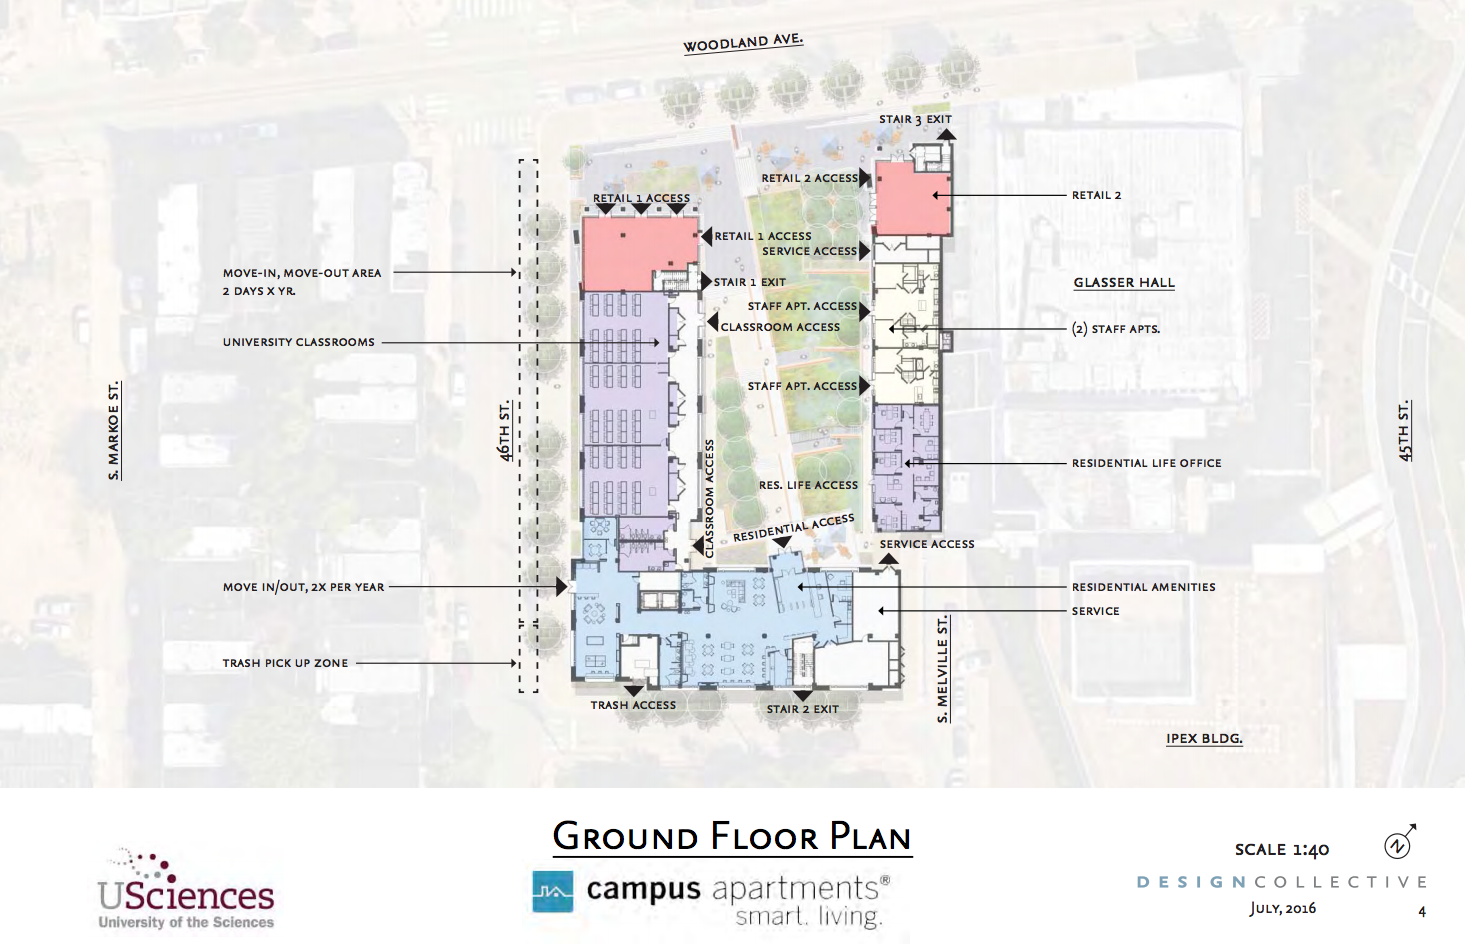 USciences residence hall ground floor plan | August 2016 CDR | Design Collective